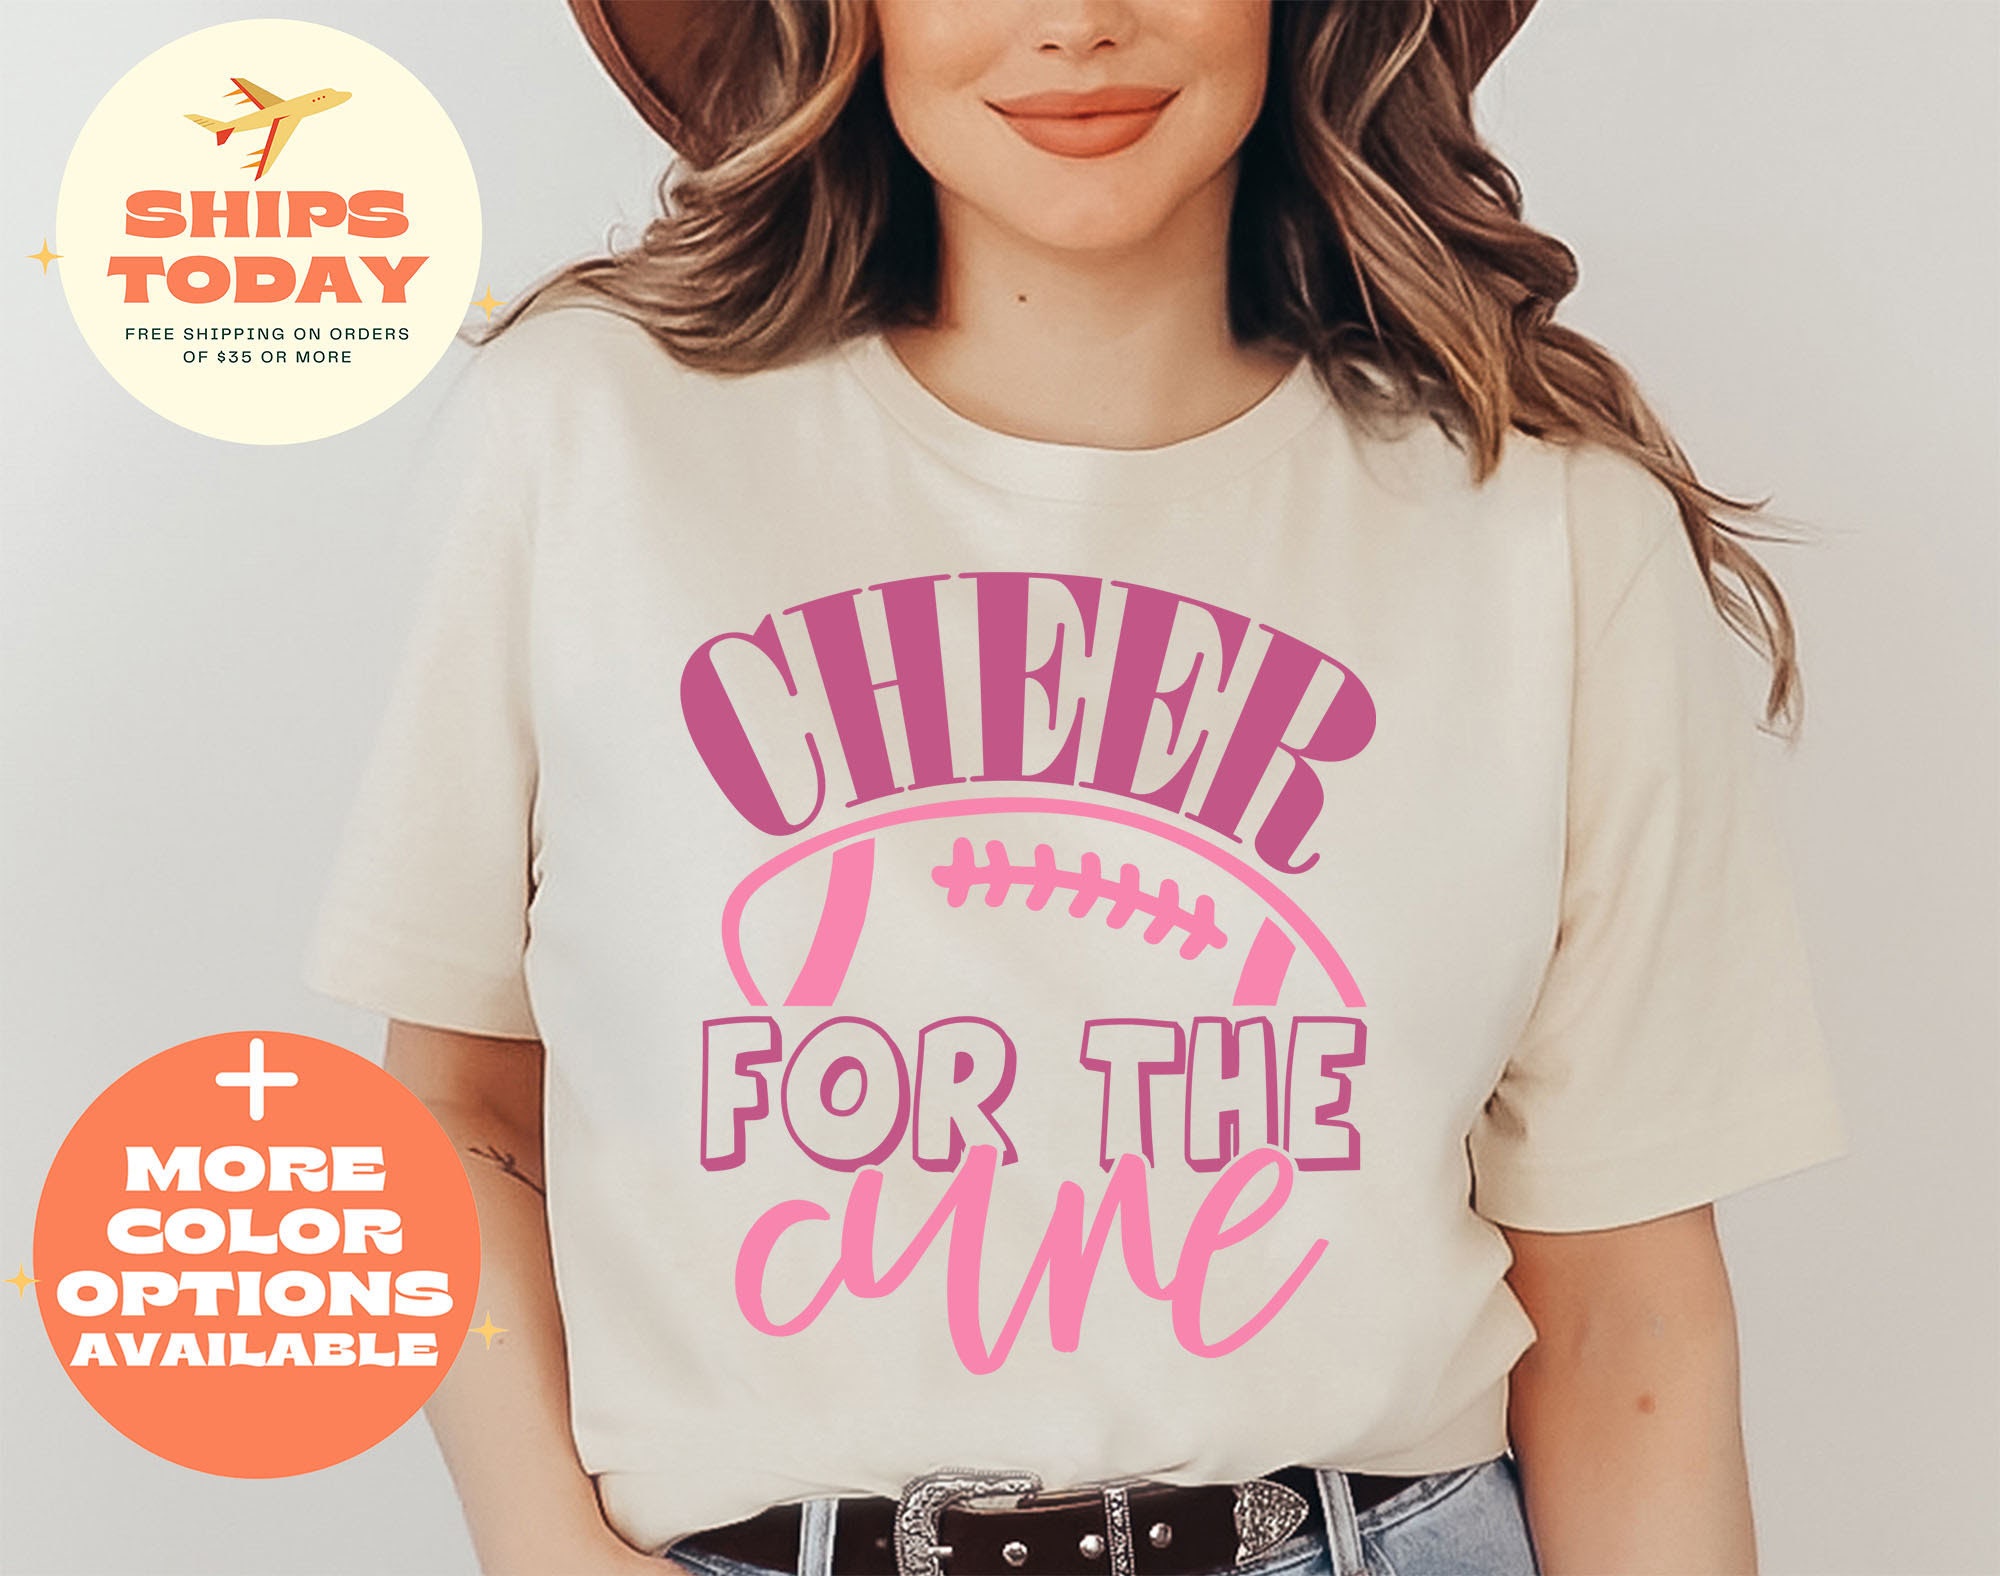 Cheer for the Cure Shirt Breast Cancer Awareness Shirt - Etsy